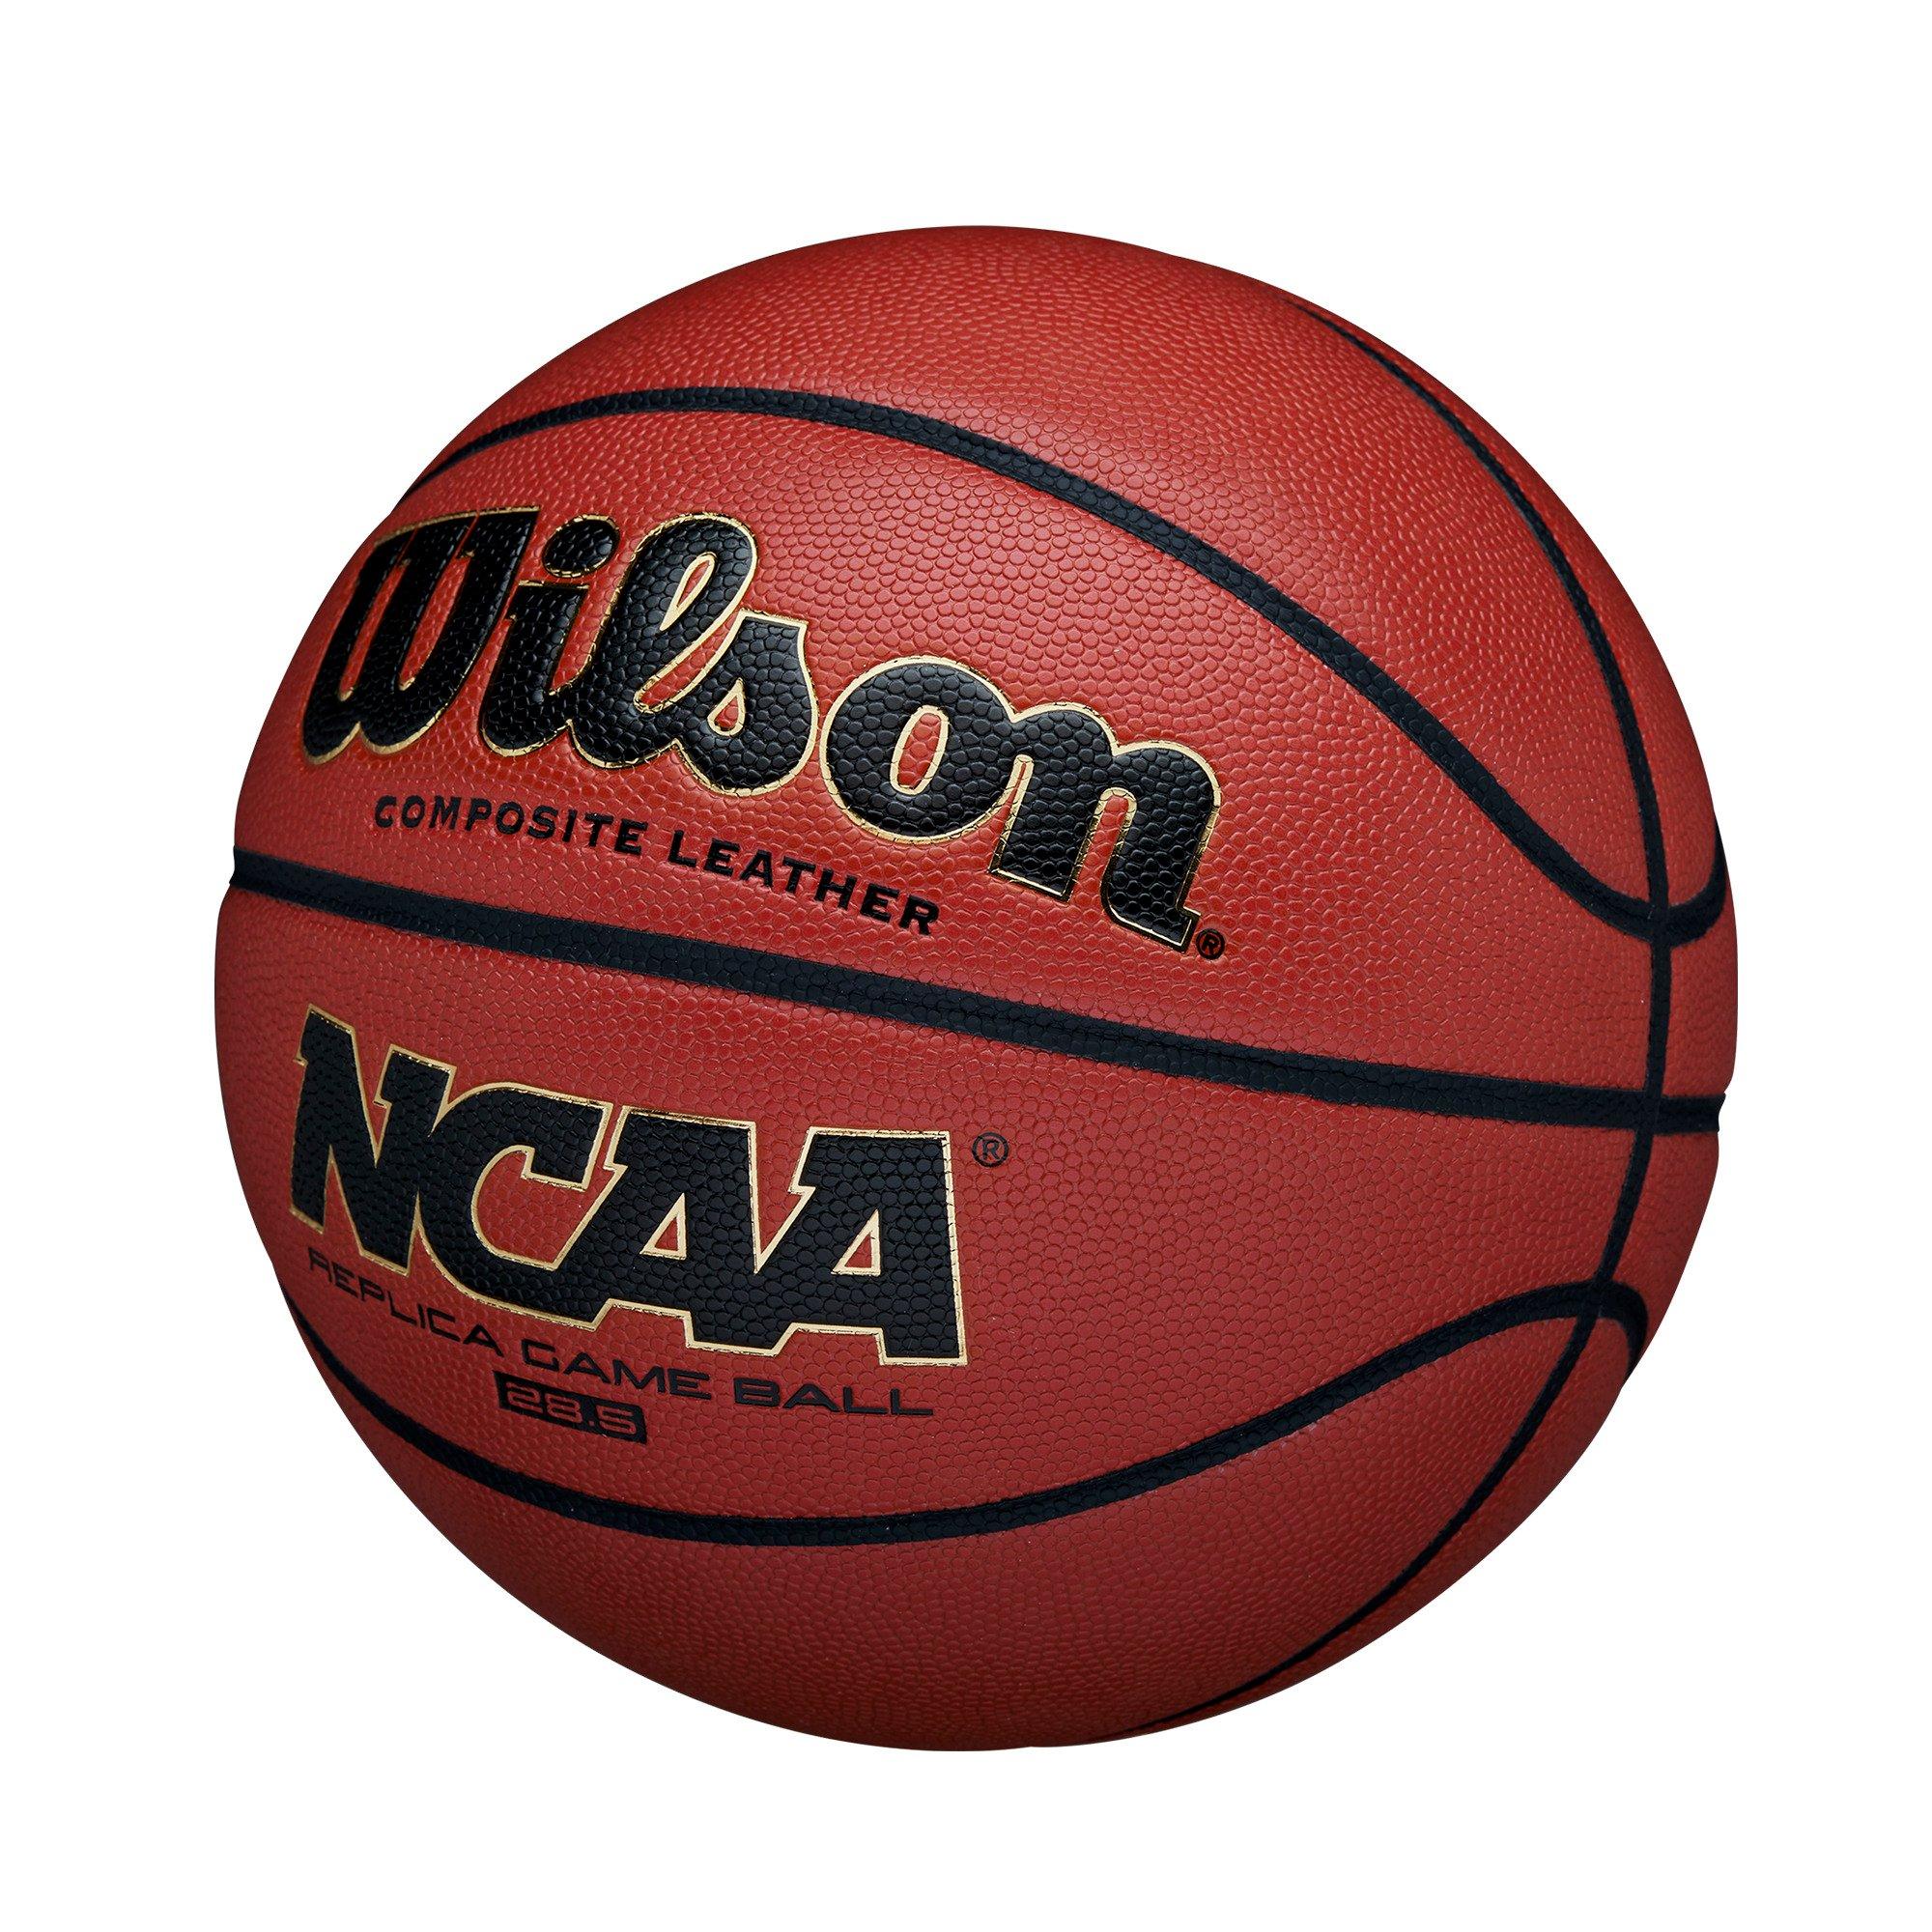 Wison Ncaa Official Size 29.5" Indoor Outdoor Training Basketball Game Ball New 